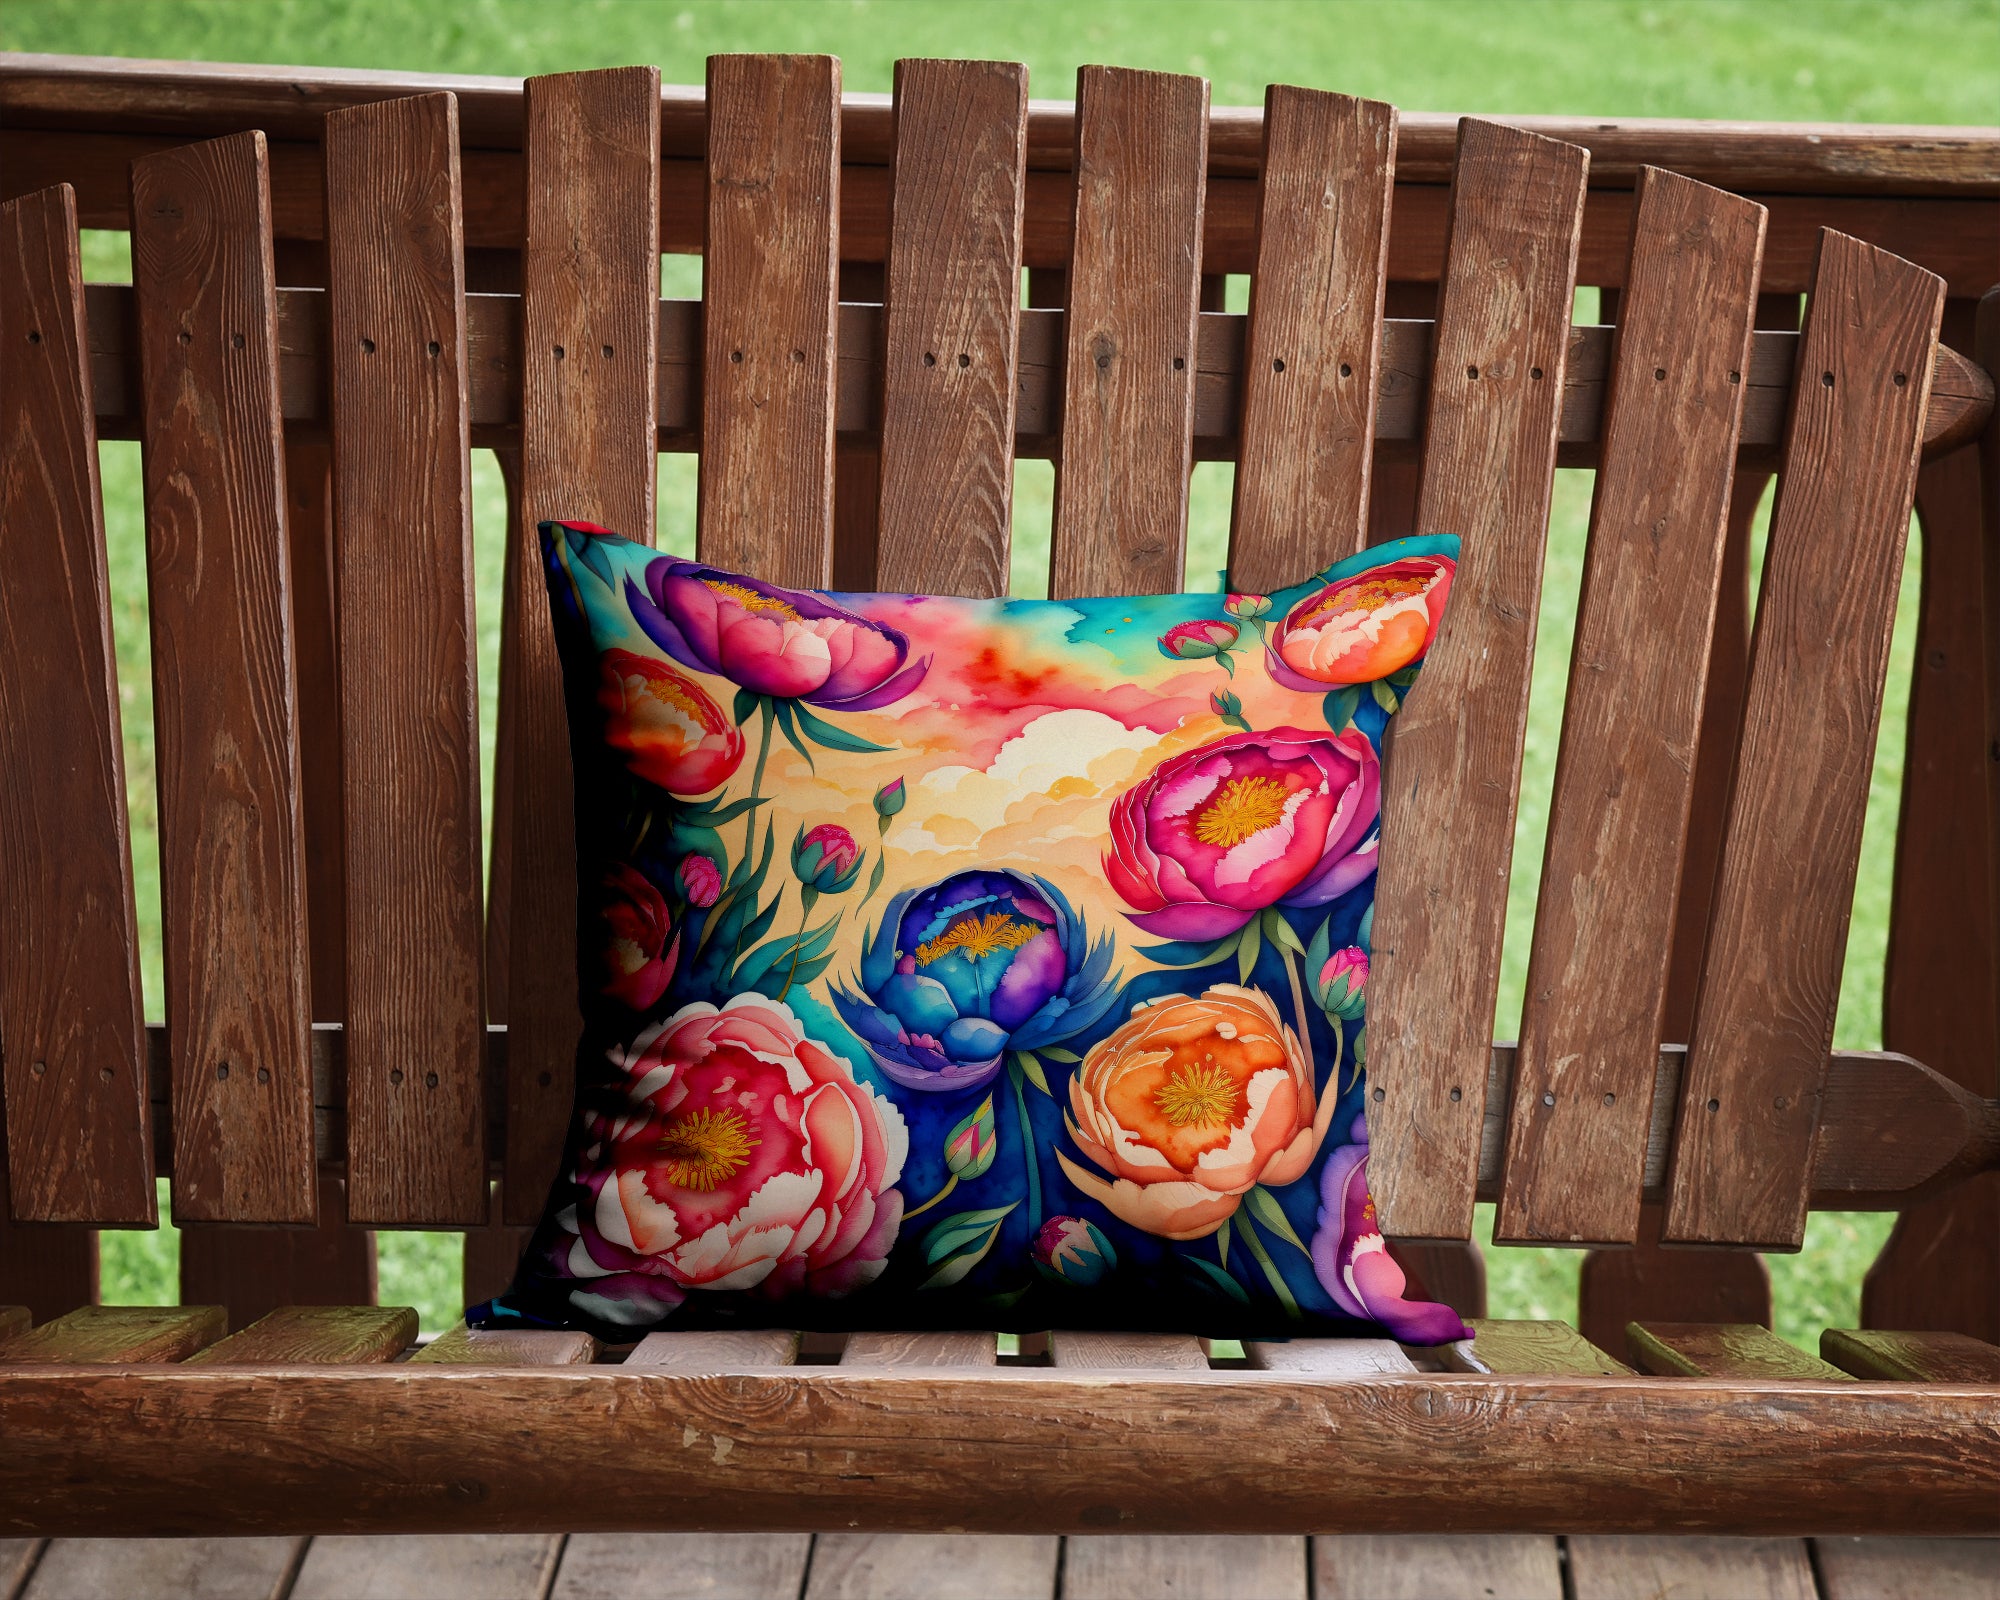 Buy this Colorful Peonies Fabric Decorative Pillow